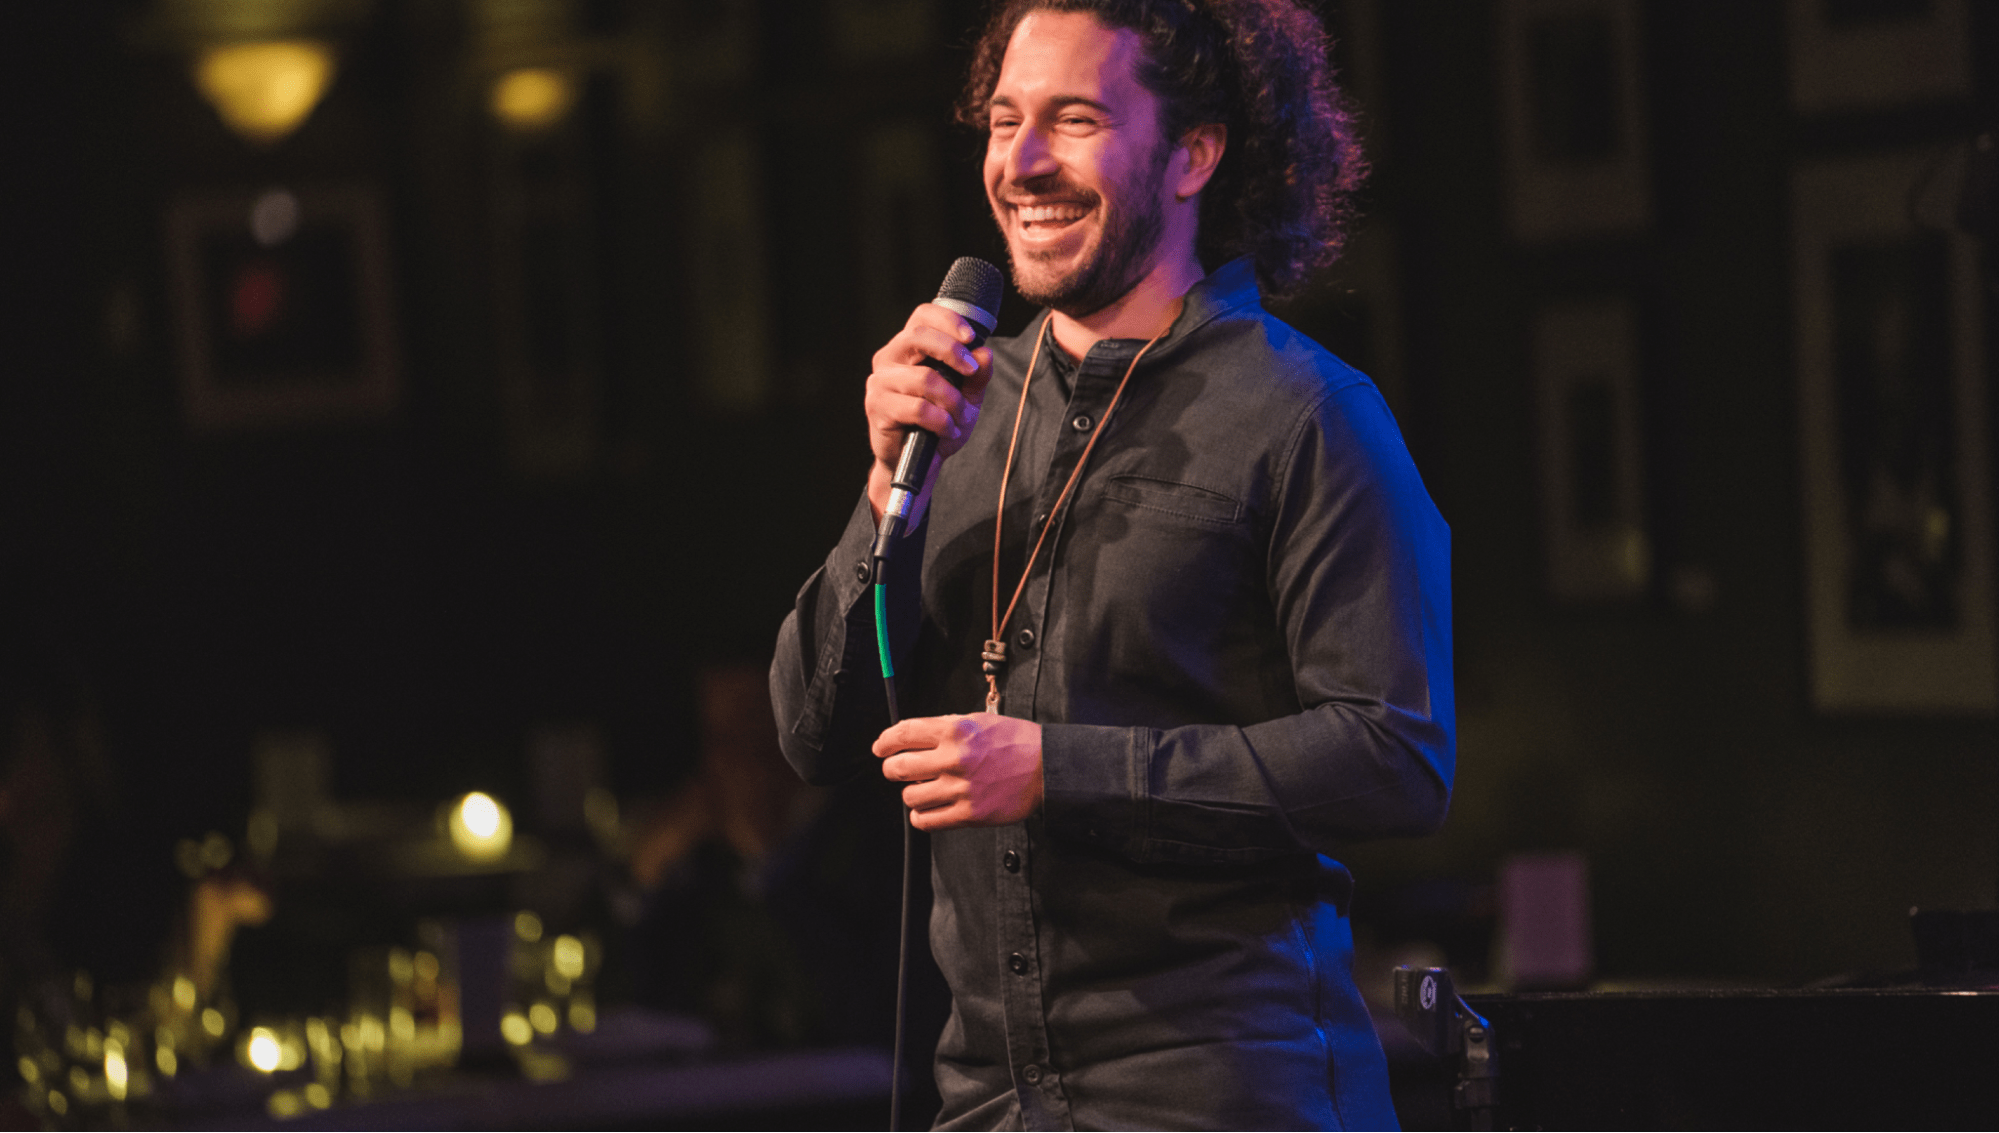 Man stands on stage smiling while talking into mic